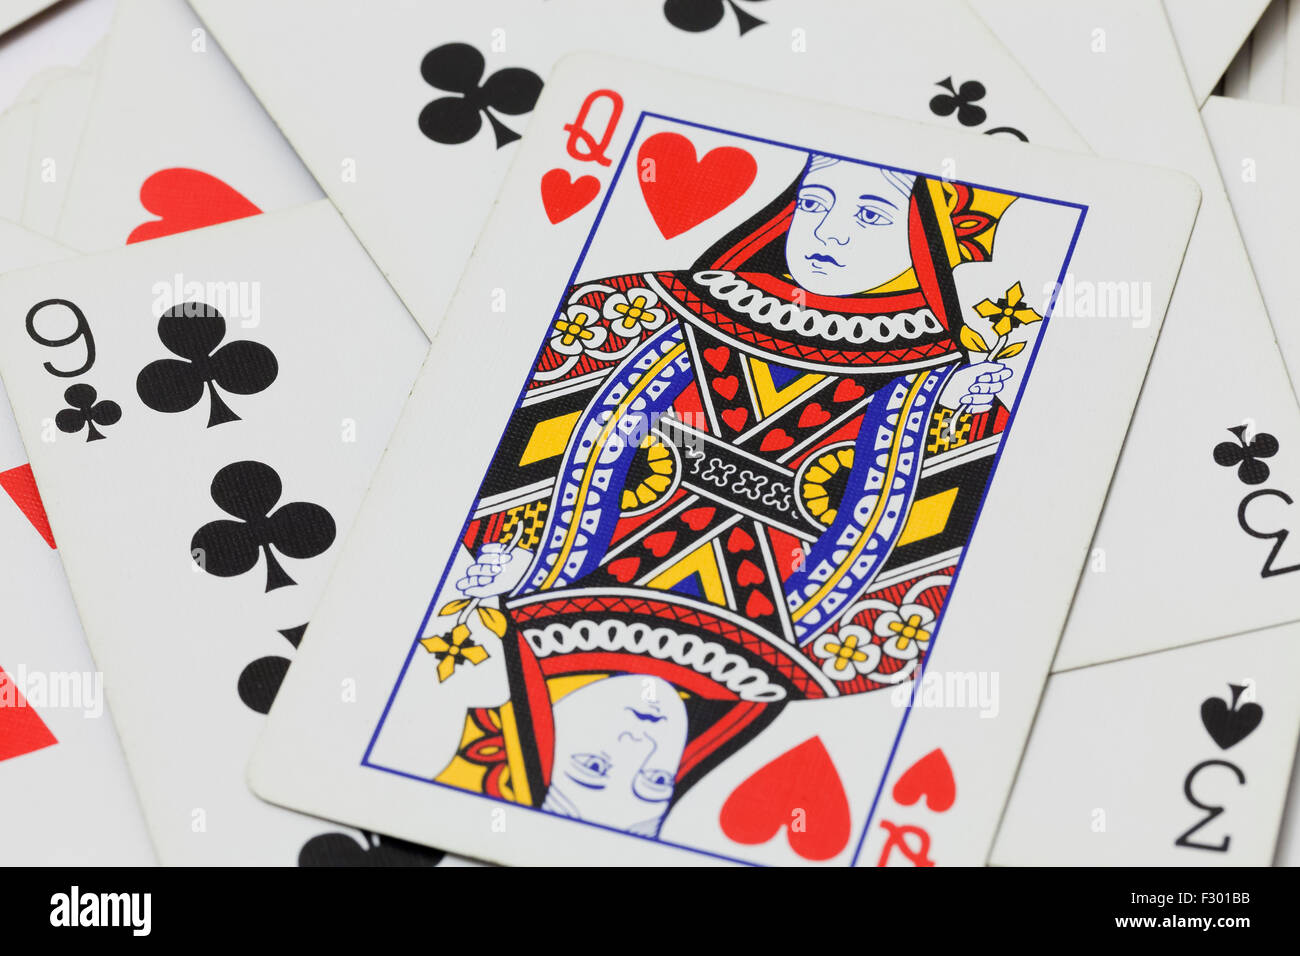 Queen of hearts playing cards Stock Photo